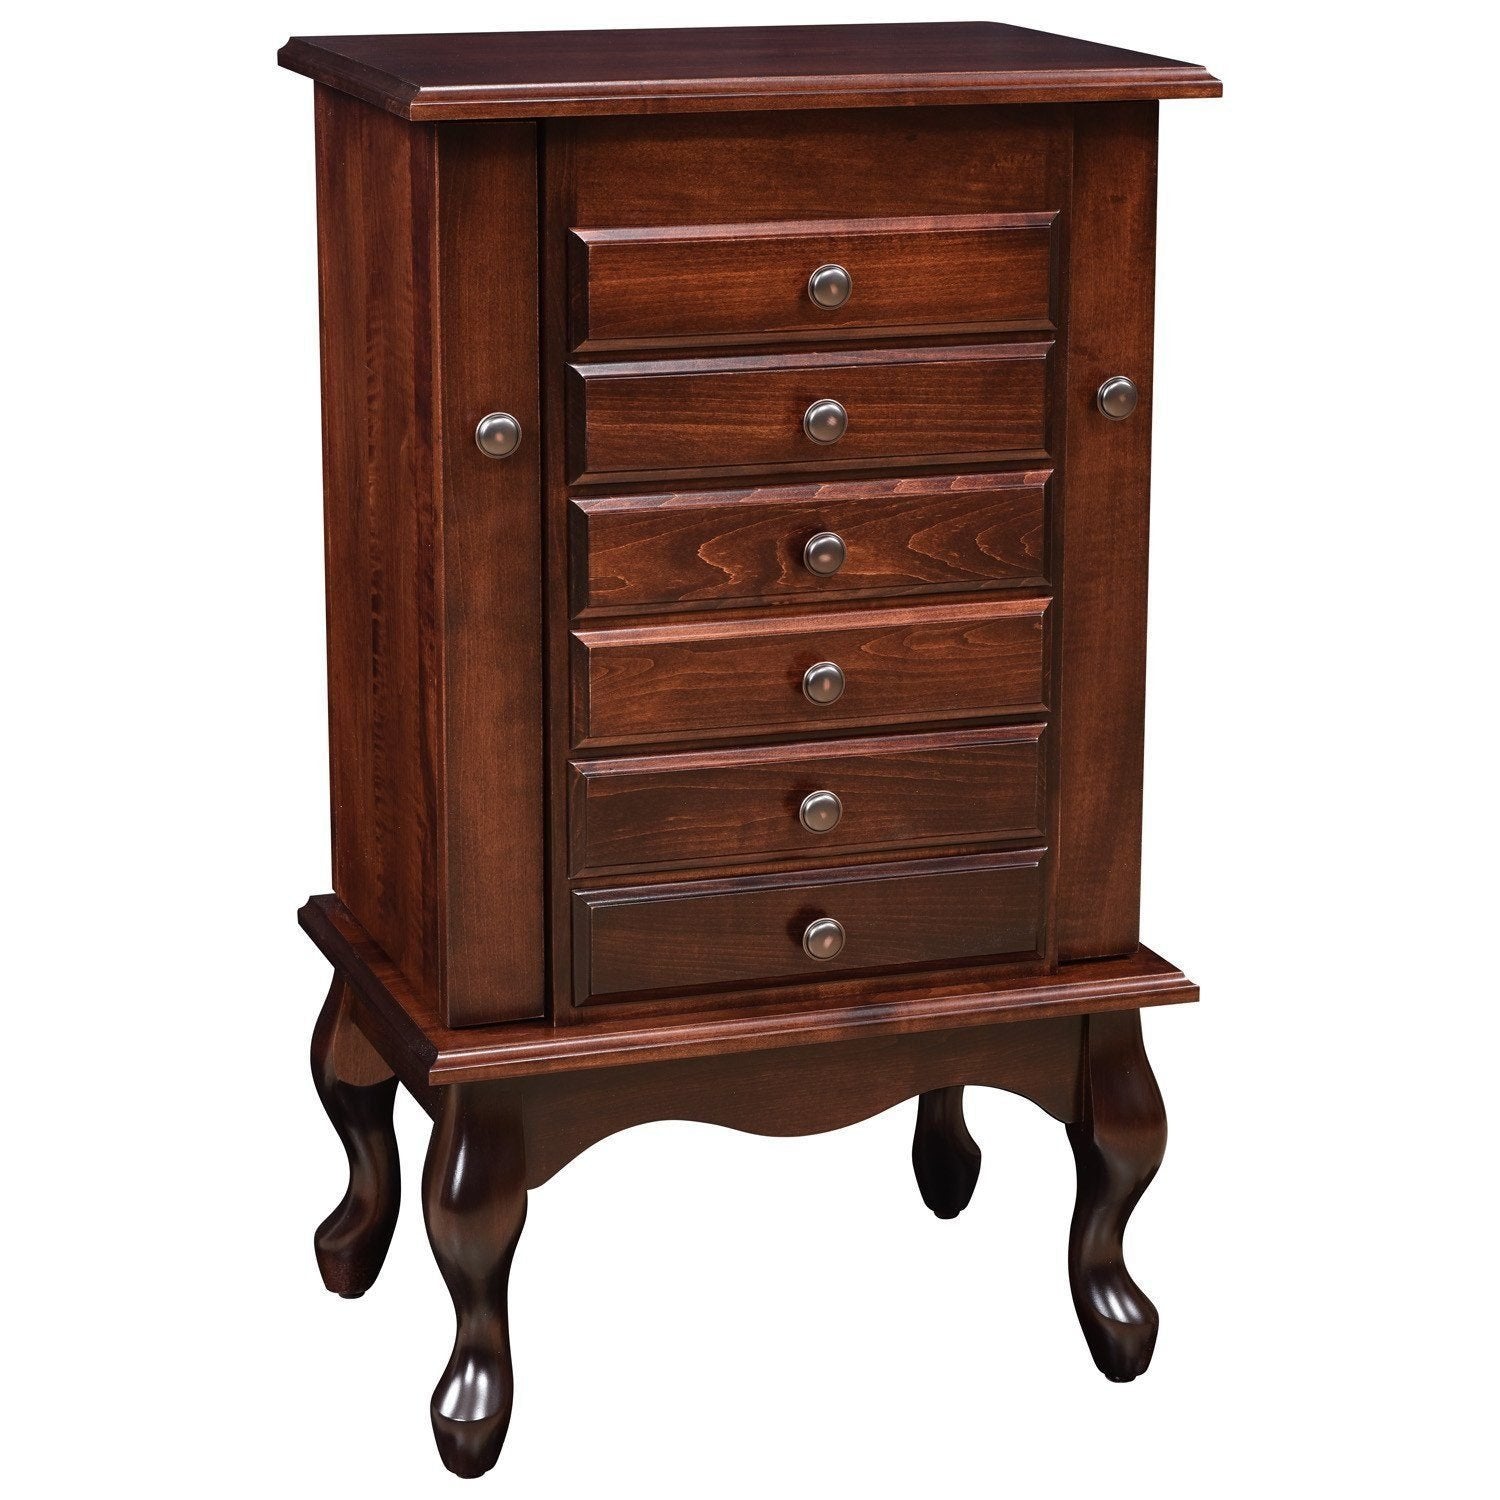 Queen Anne 35" Jewelry Armoire